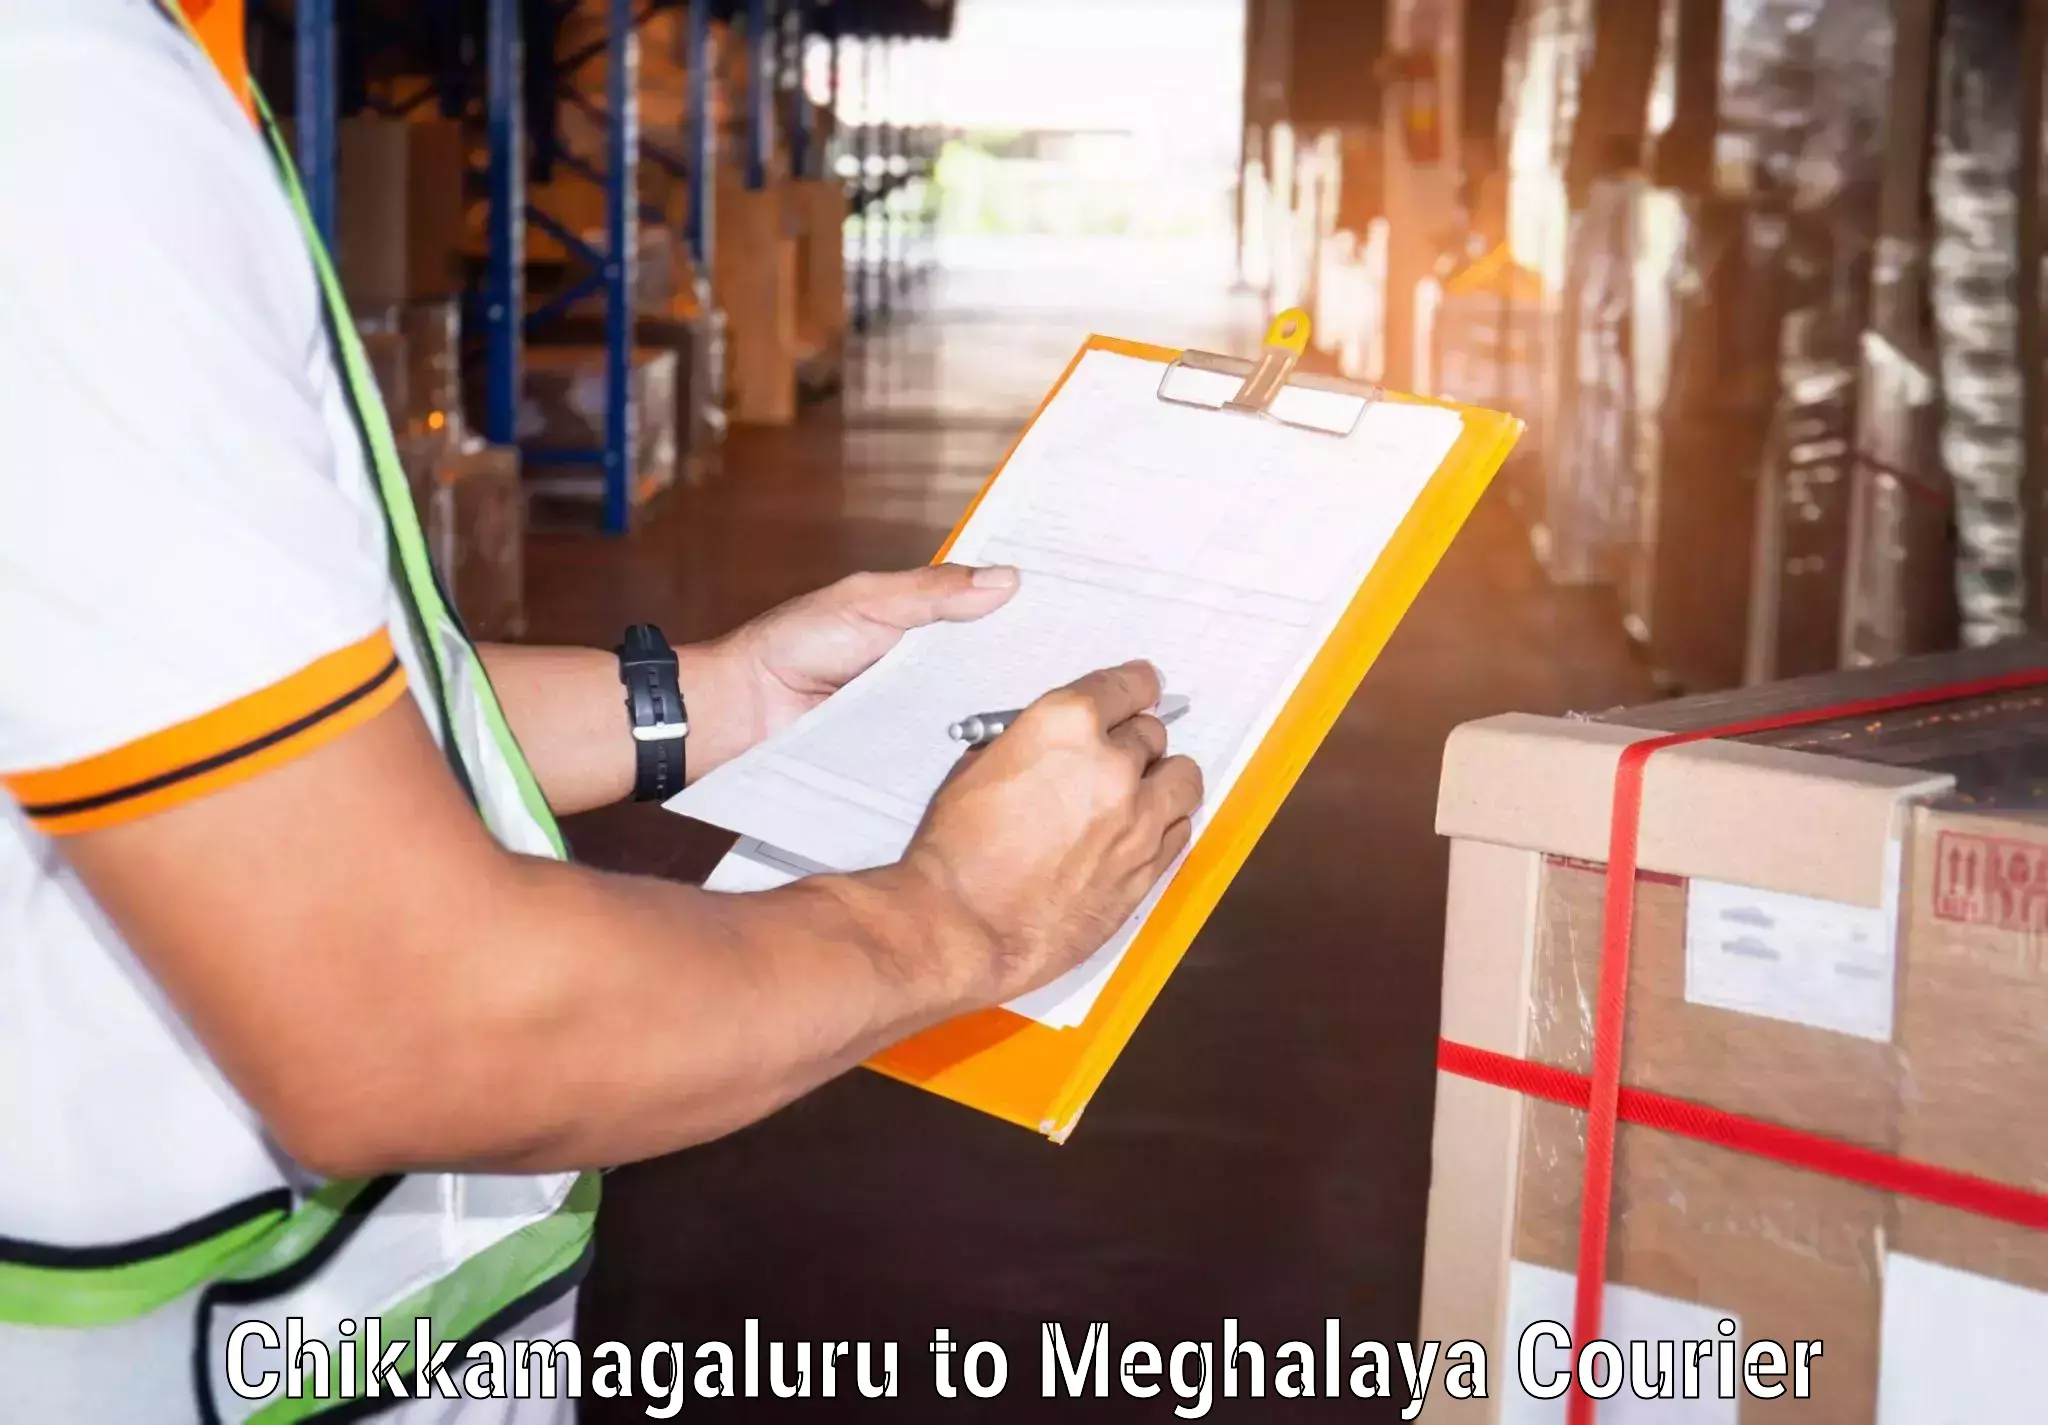 High value parcel delivery in Chikkamagaluru to Shillong